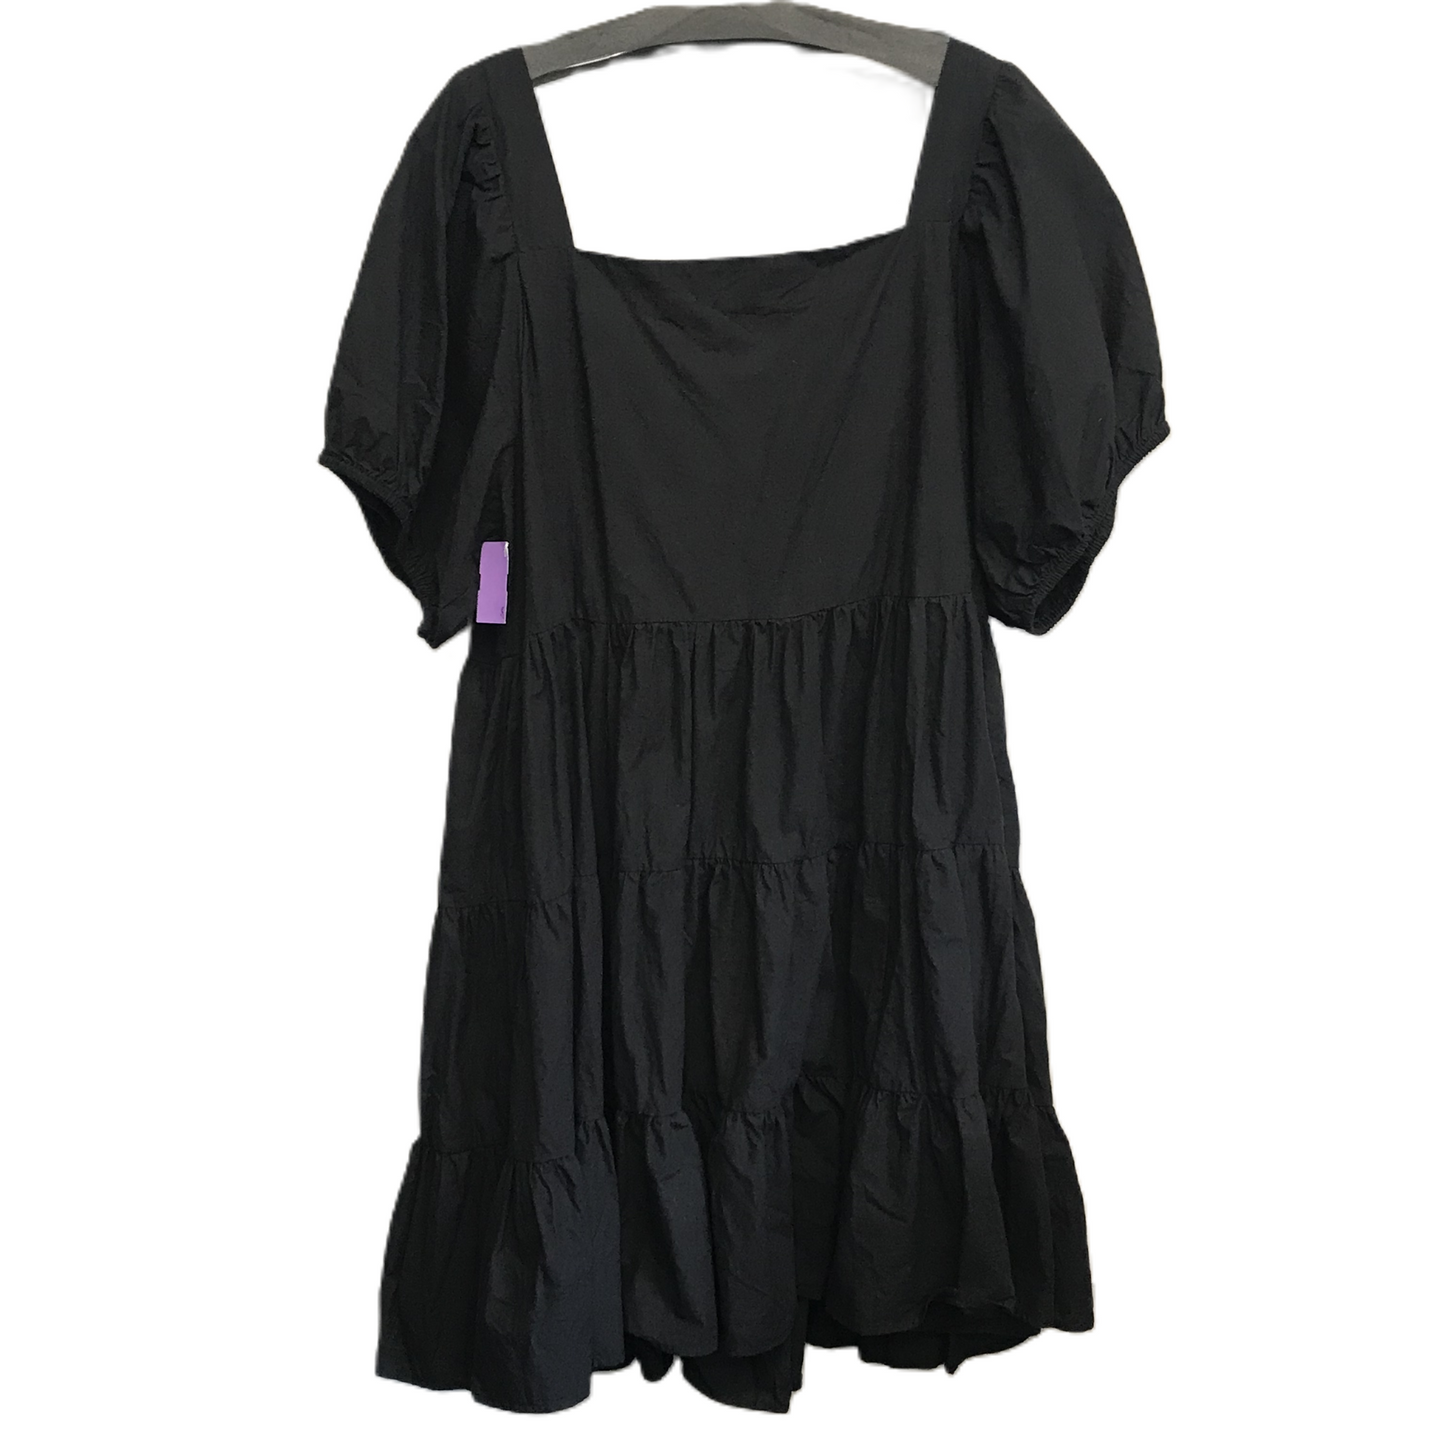 Black Dress Casual Short By The Golden Globe Clothing, Size: 3x